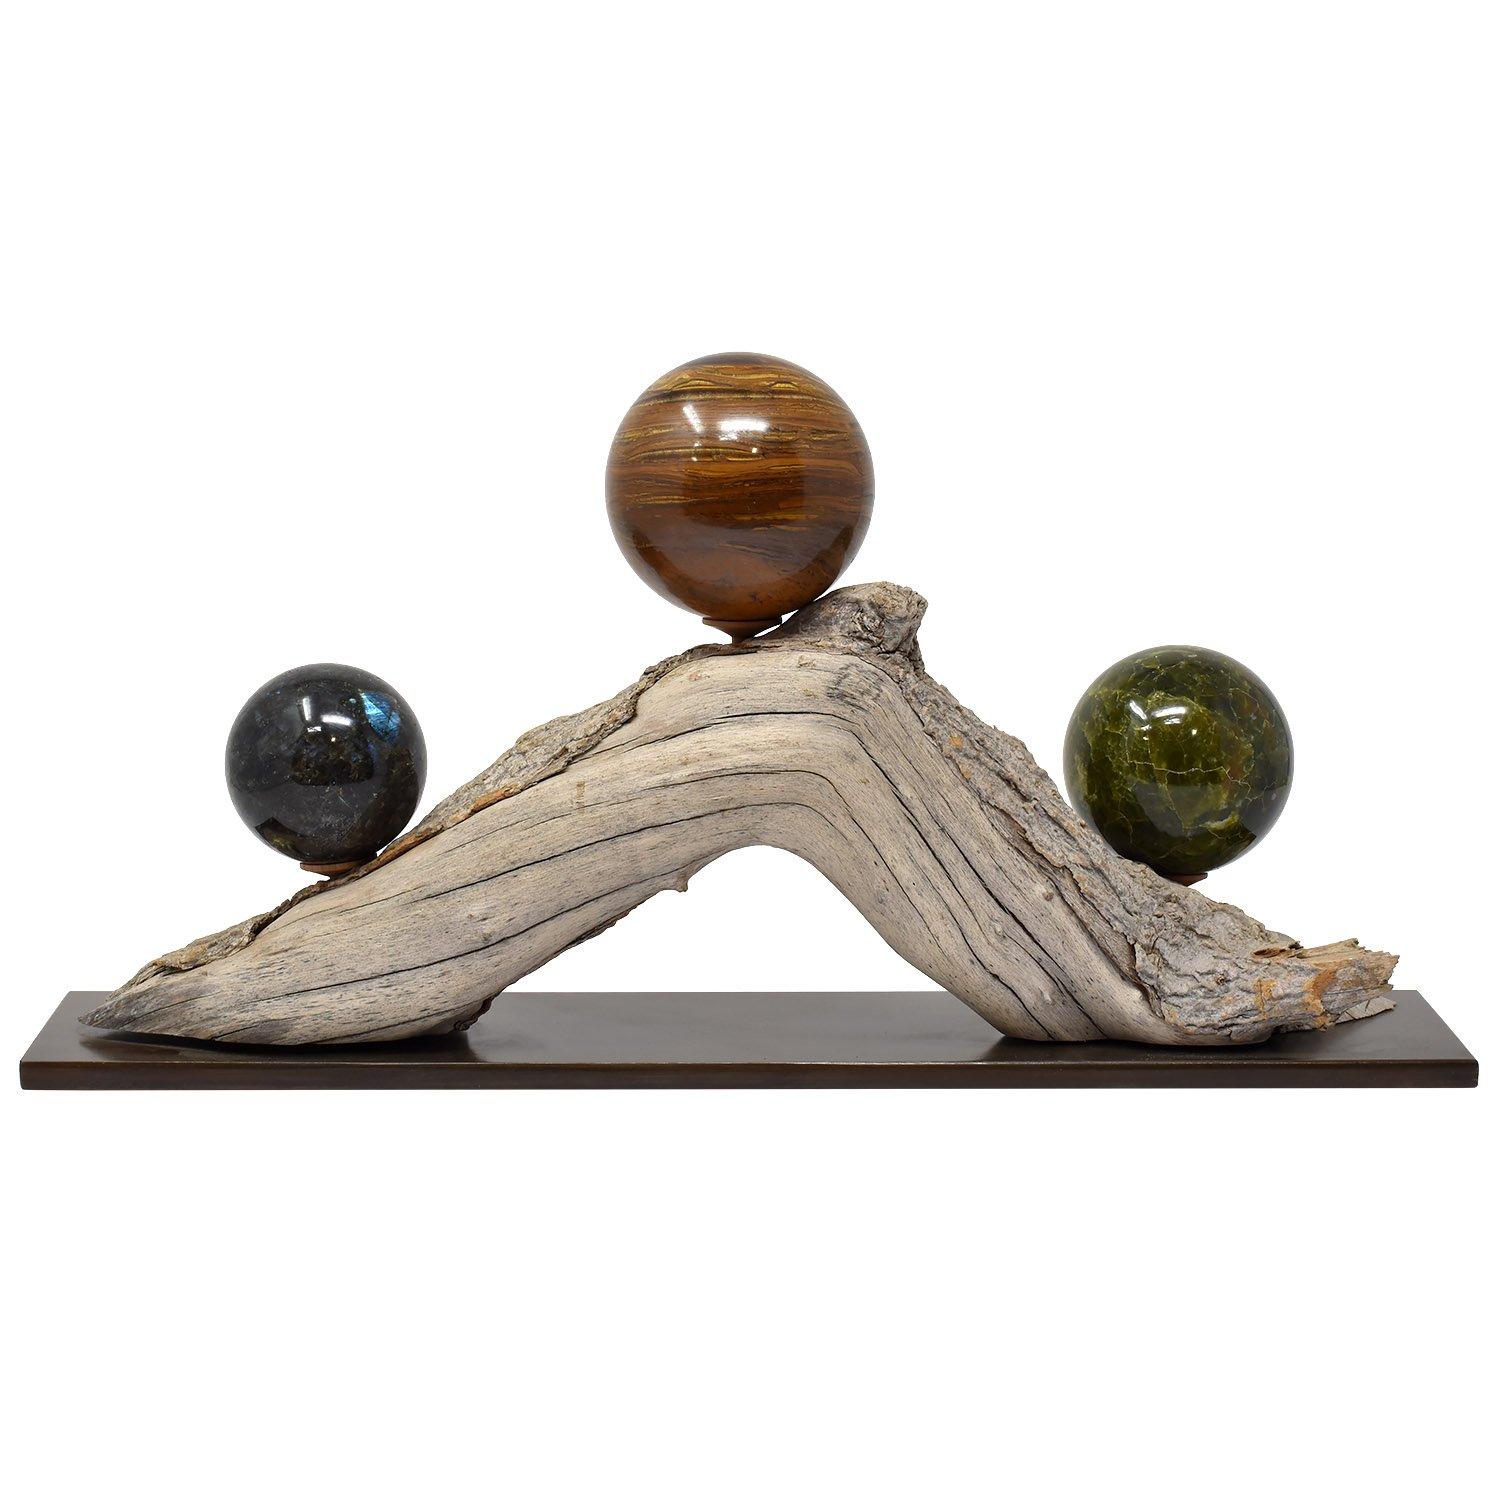 American Three Mineral Spheres Mounted on an Organic Wood Branch